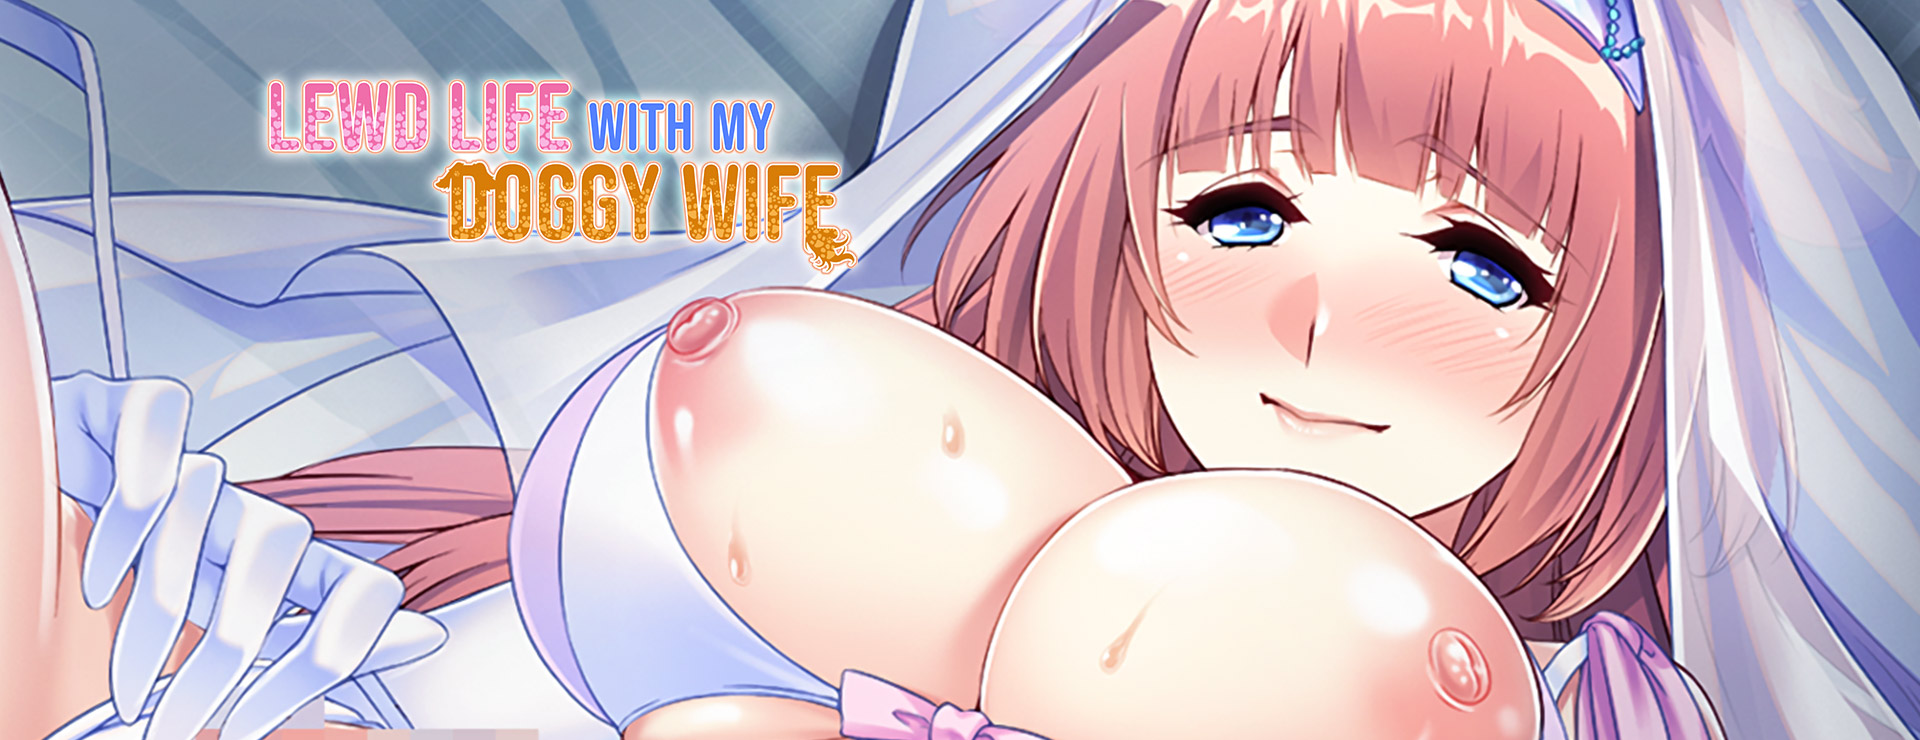 Lewd Life with my Doggy Wife! - Japanisches Adventure Spiel